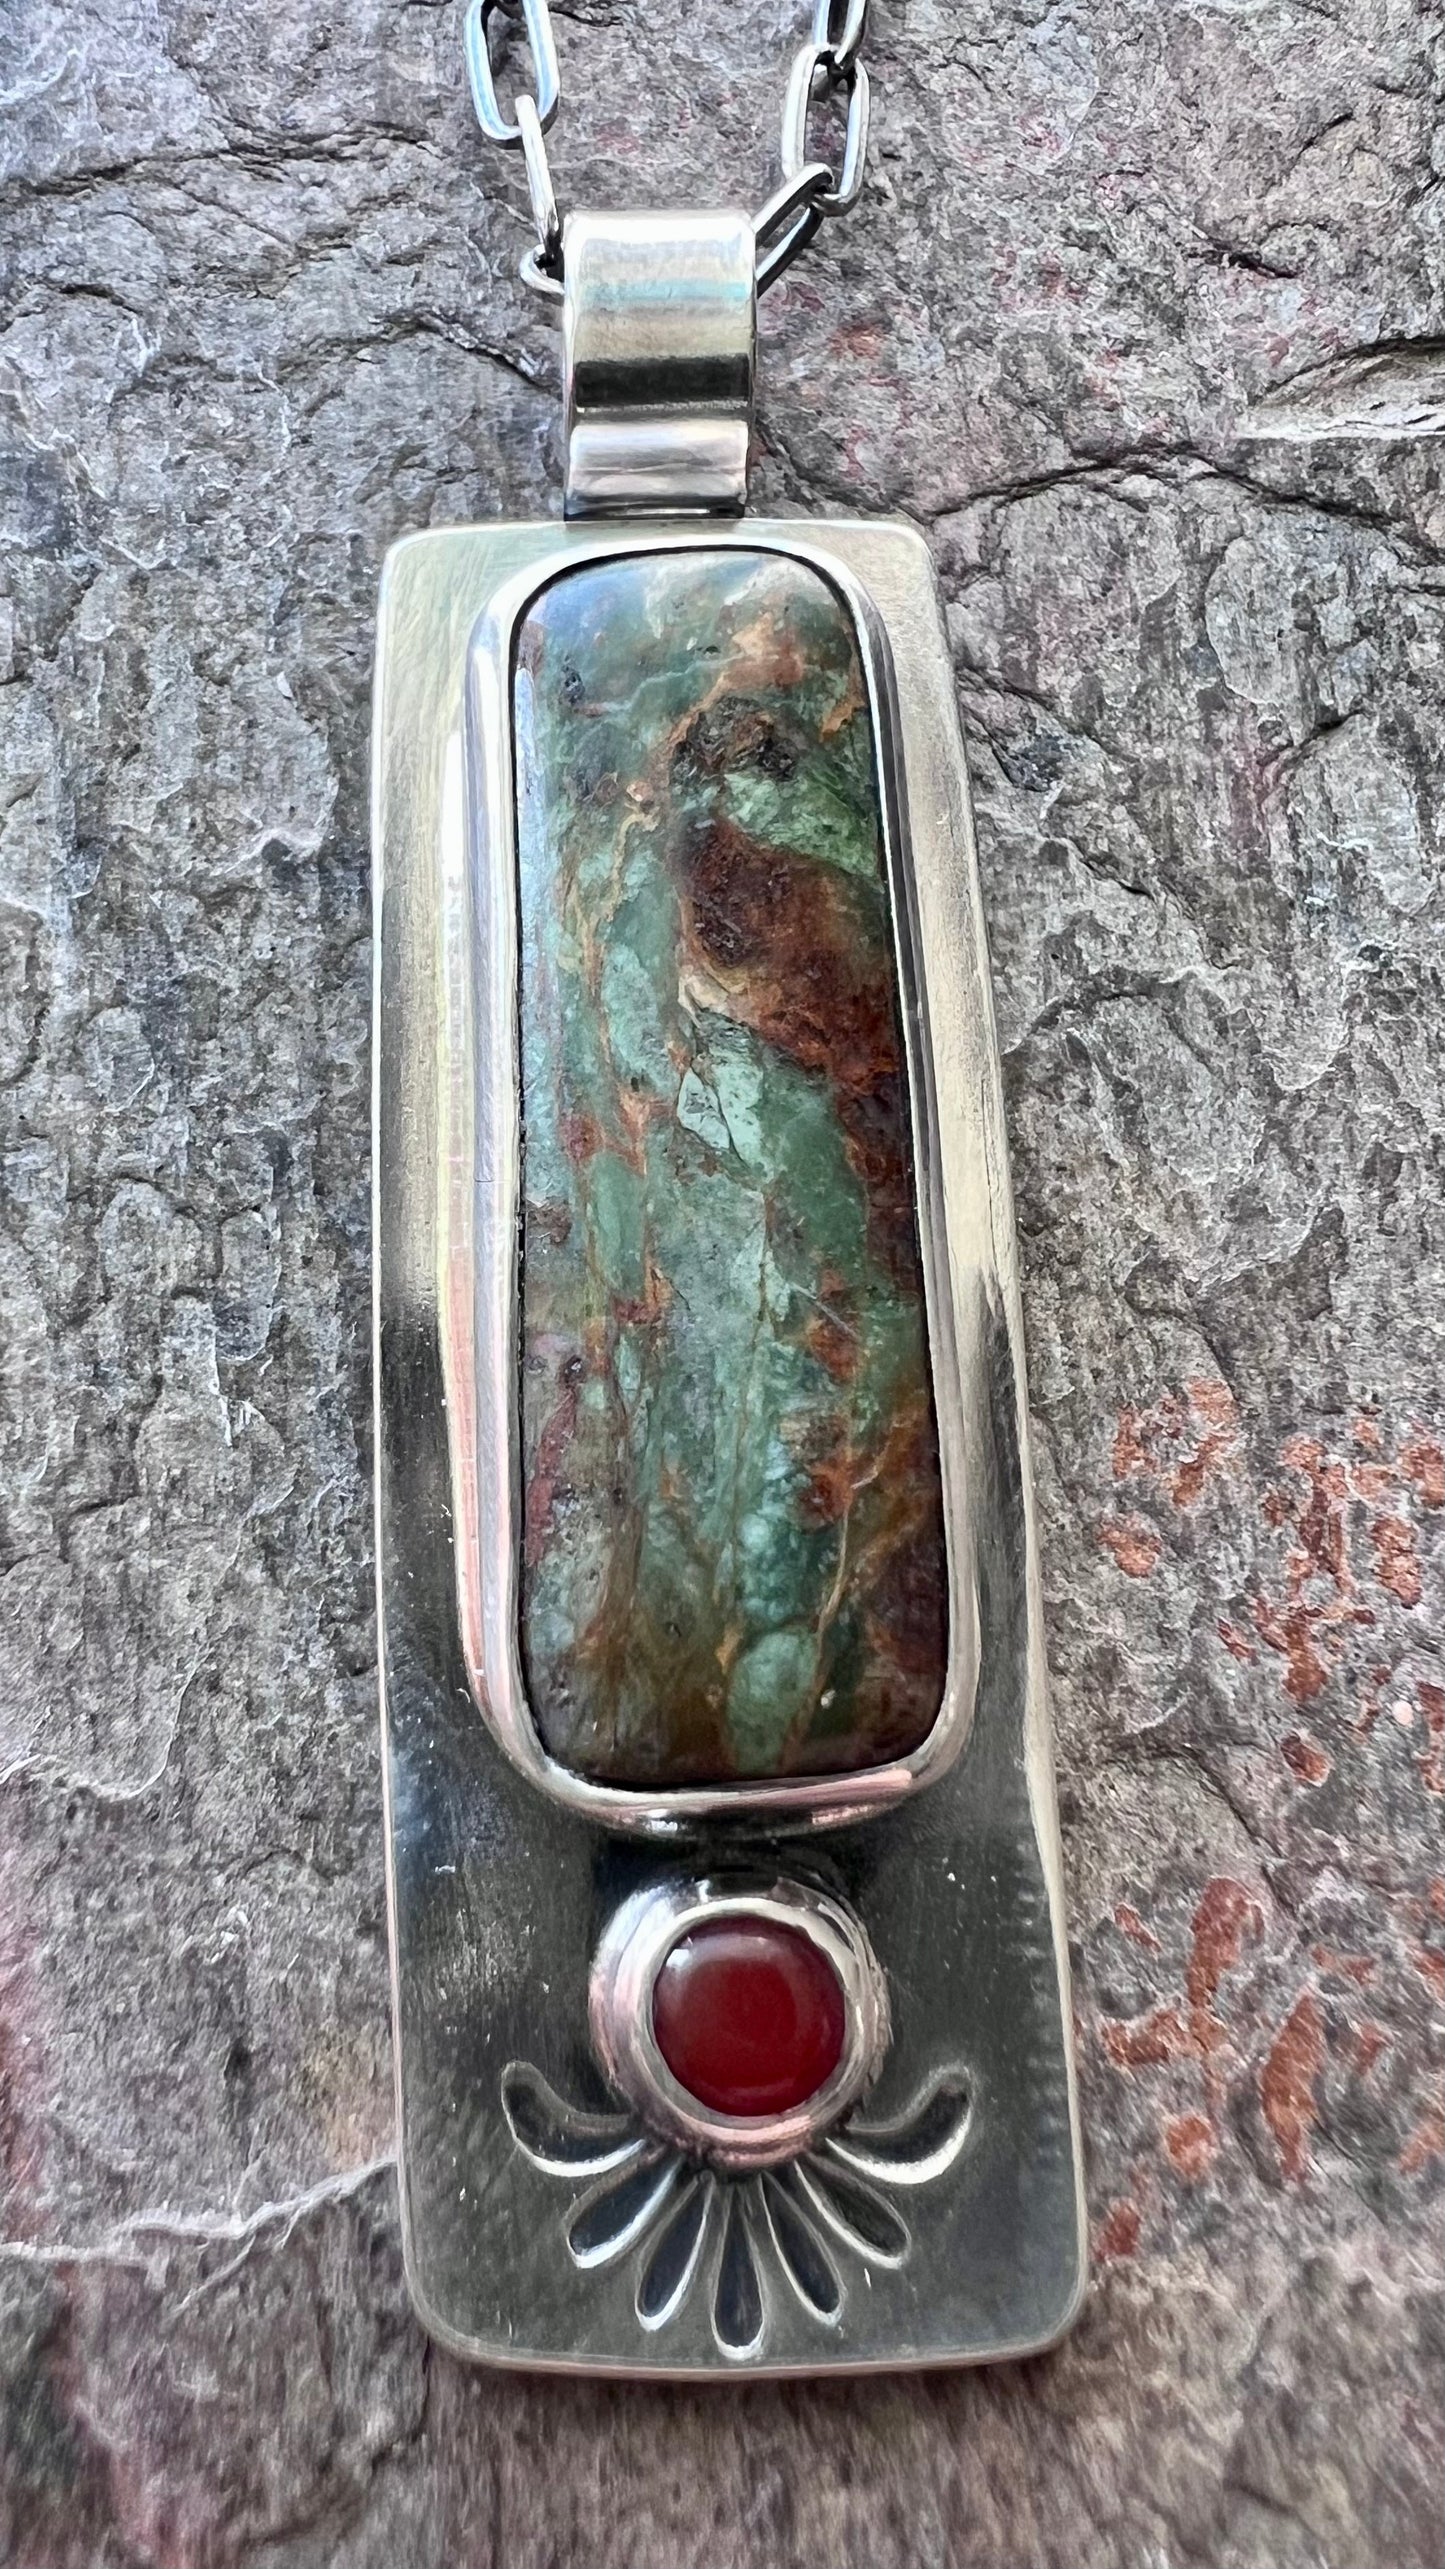 SOLD Jasper and Carnelian Sterling Silver Necklace - Handmade One-of-a-kind Pendant on Sterling Silver Chain